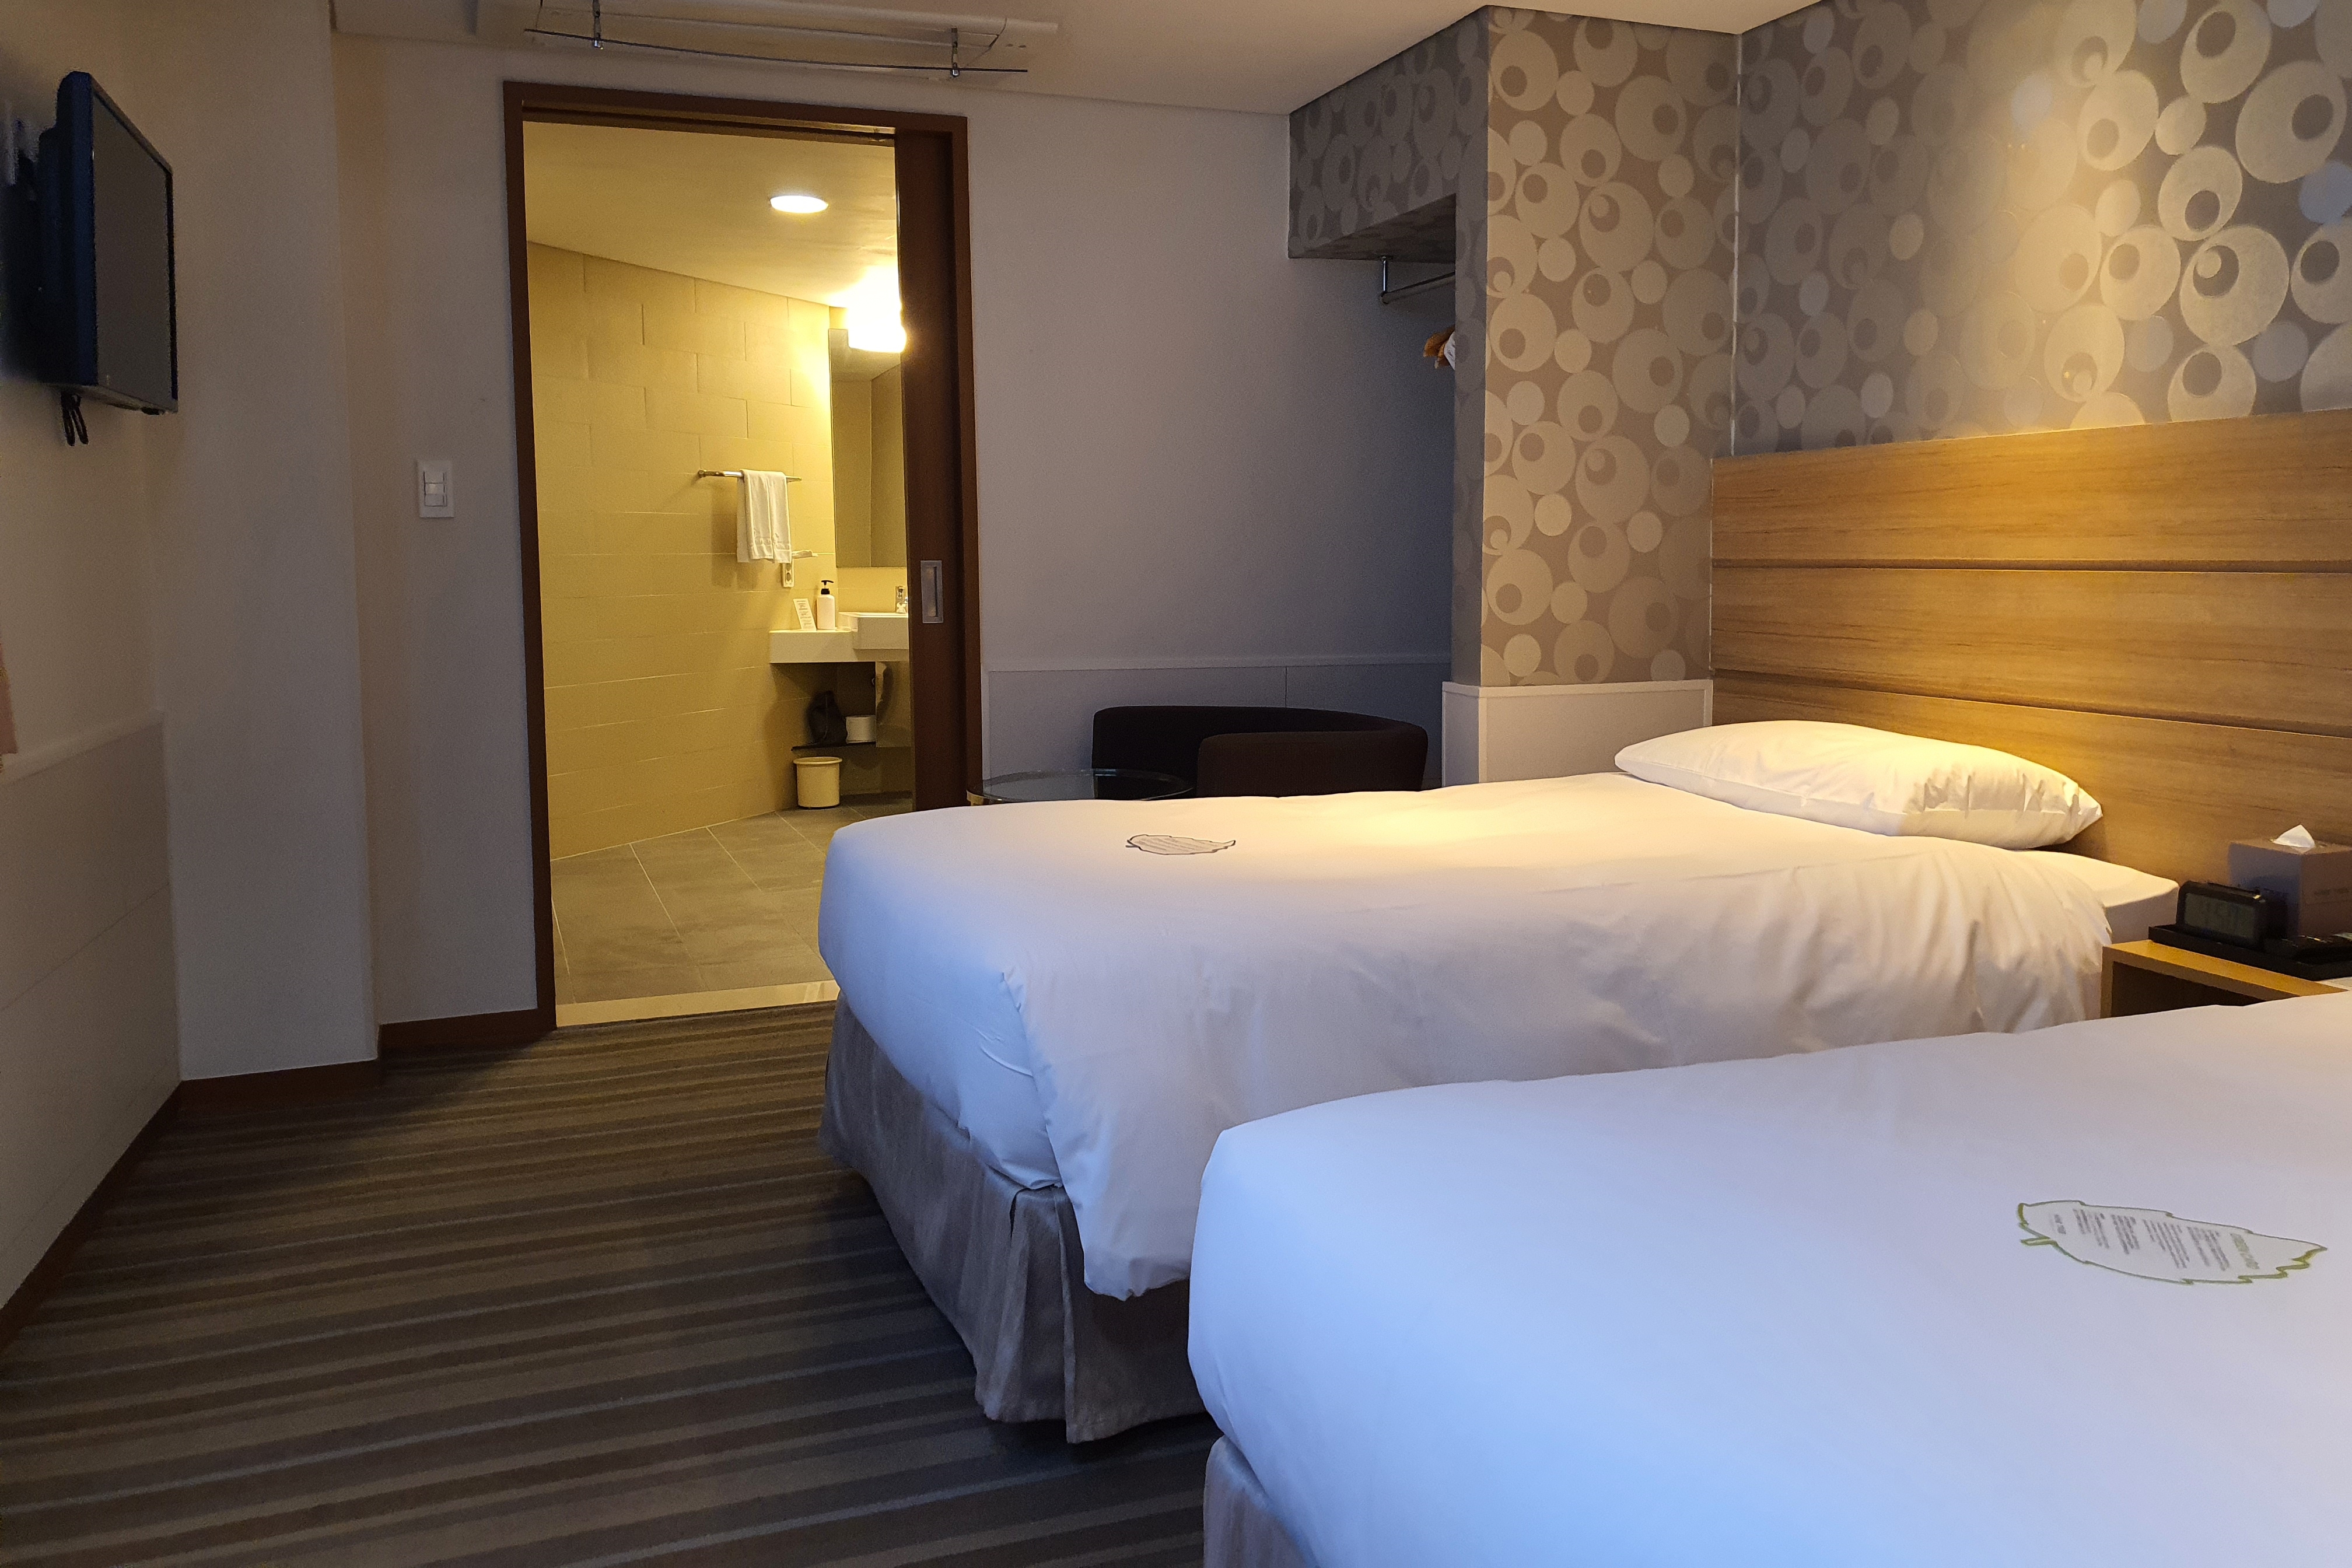 Nine Tree Hotel Myeongdong2 : Neat interior view of the accessible guest room 